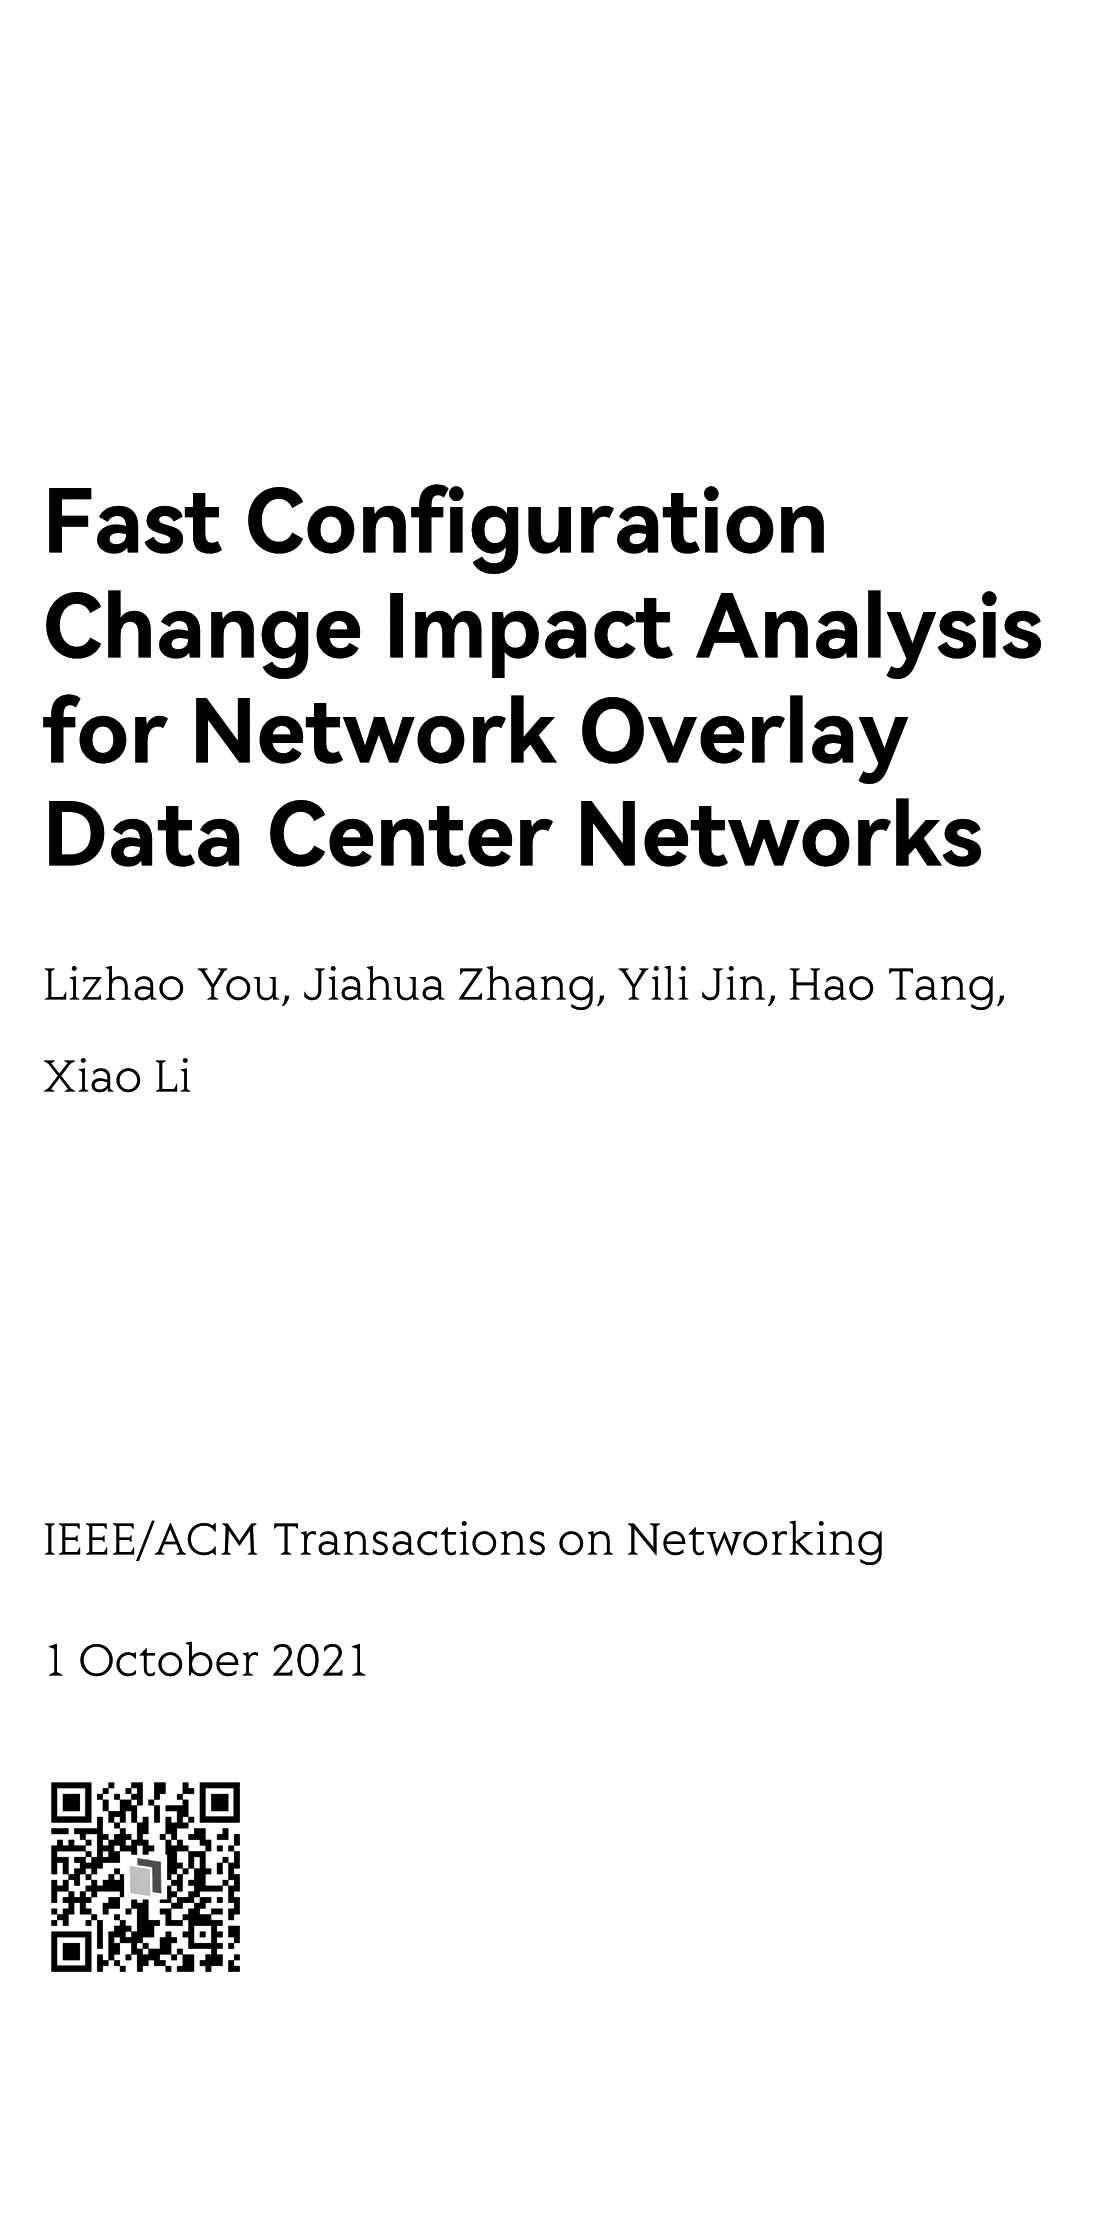 Fast Configuration Change Impact Analysis for Network Overlay Data Center Networks_1